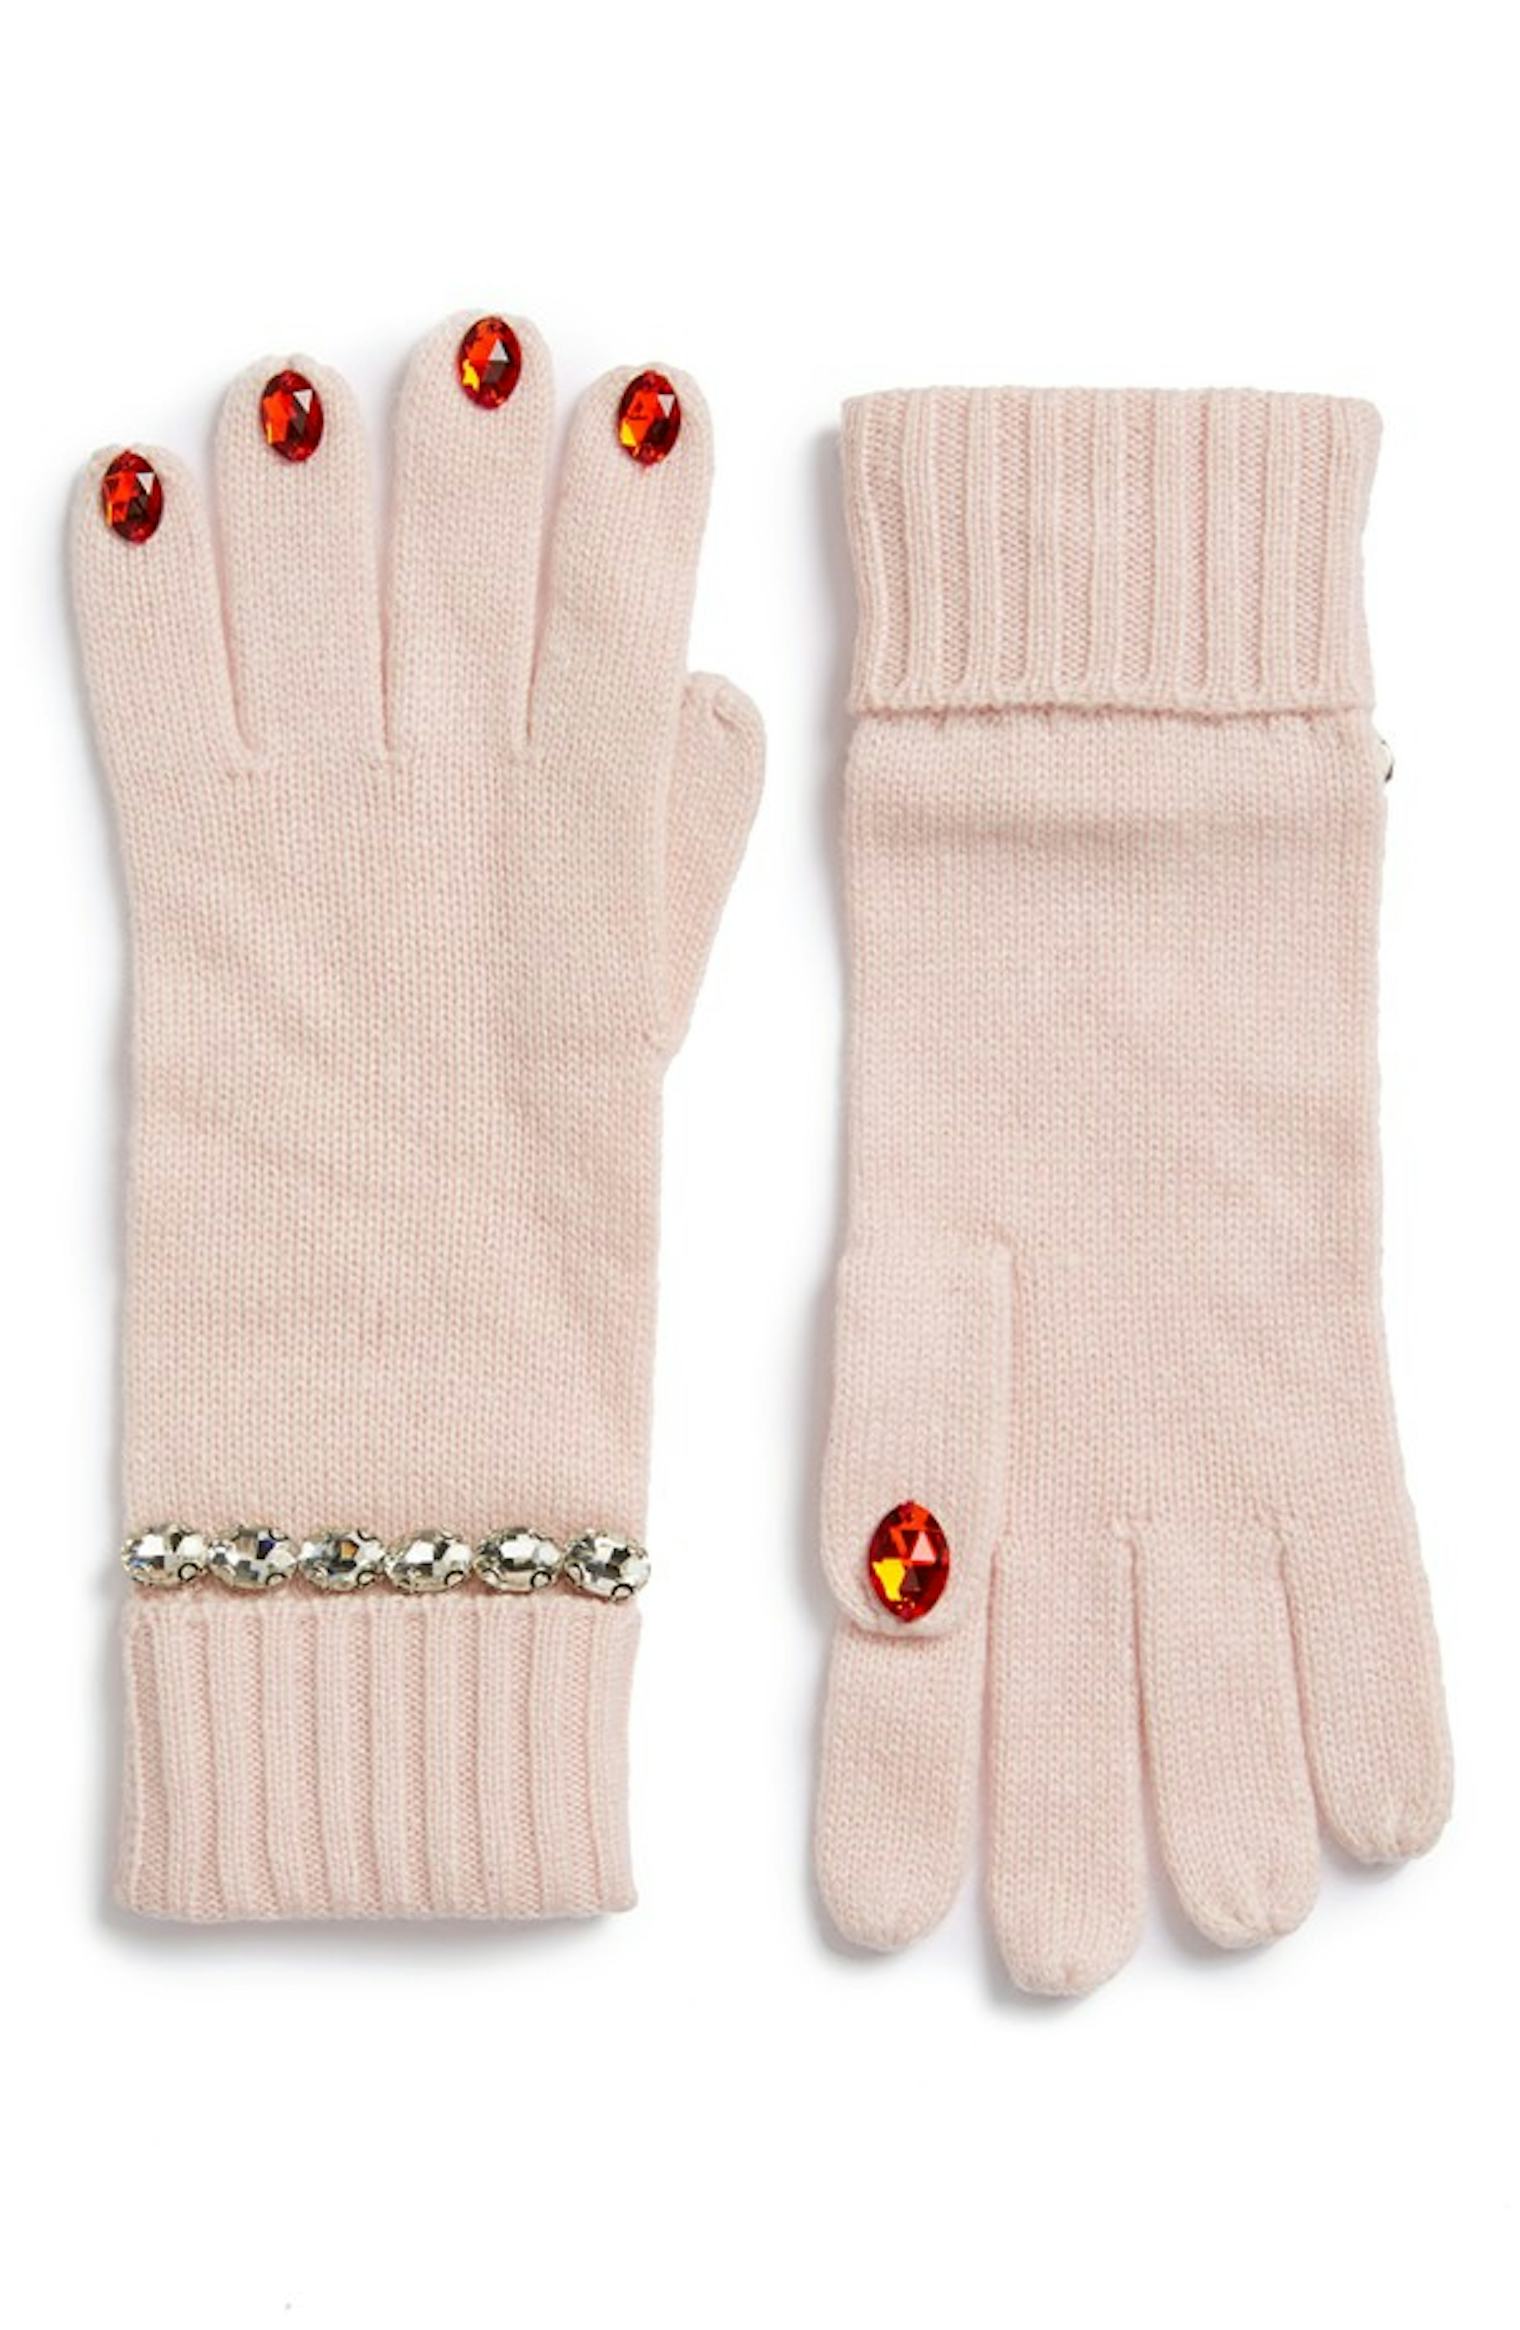 How To Wash Wool Gloves Correctly Because Your Mitts Need Love Too — PHOTOS